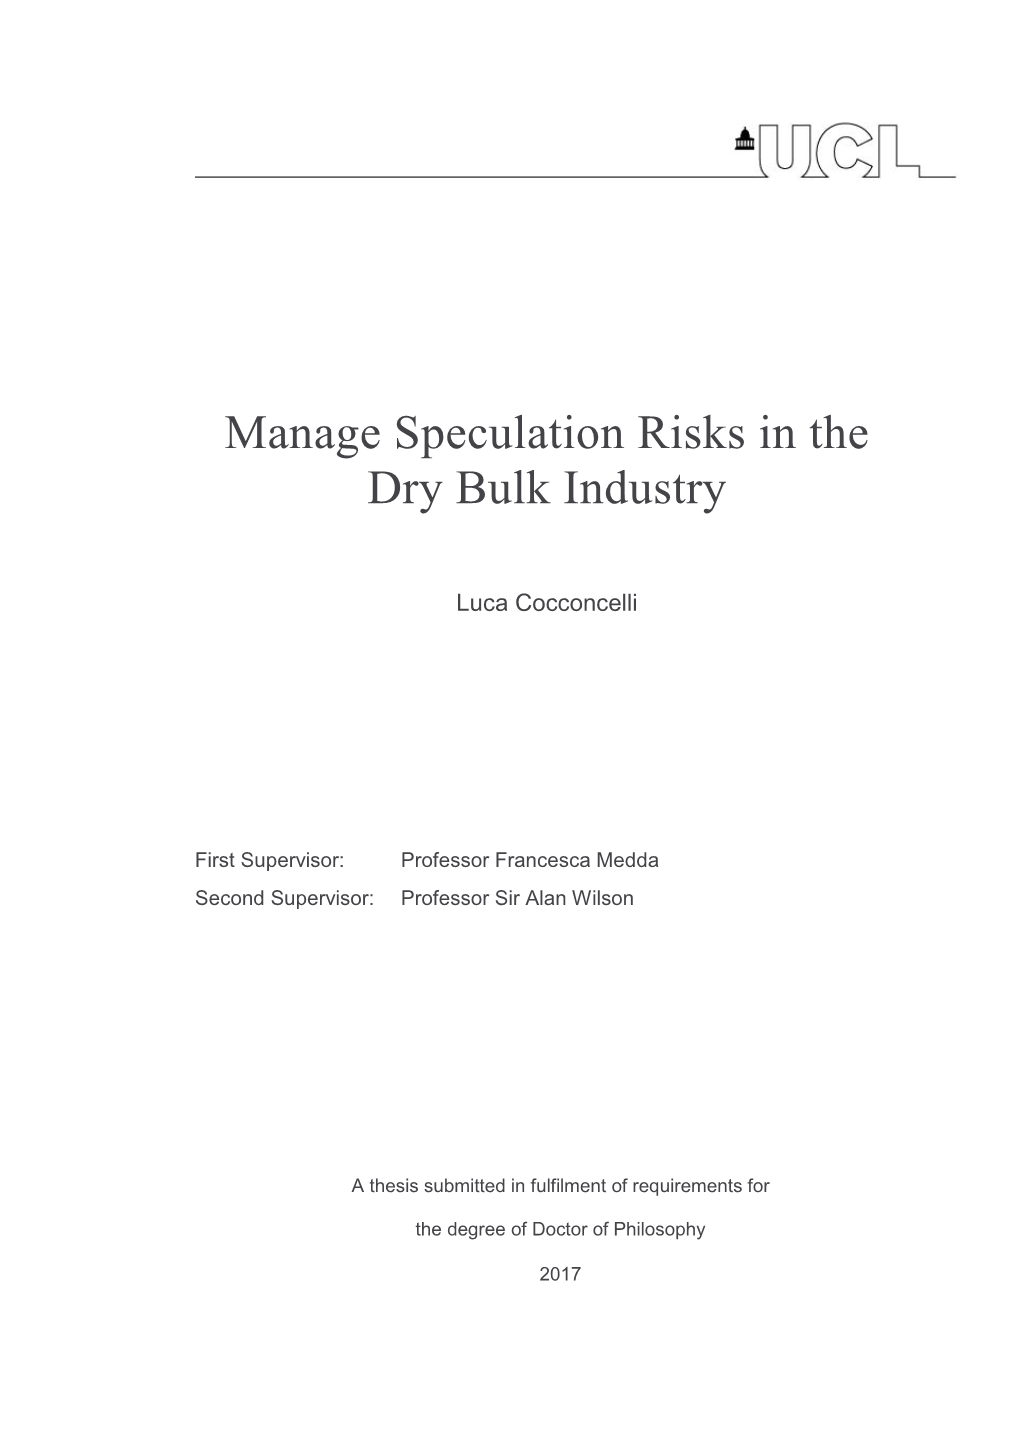 Manage Speculation Risks in the Dry Bulk Industry